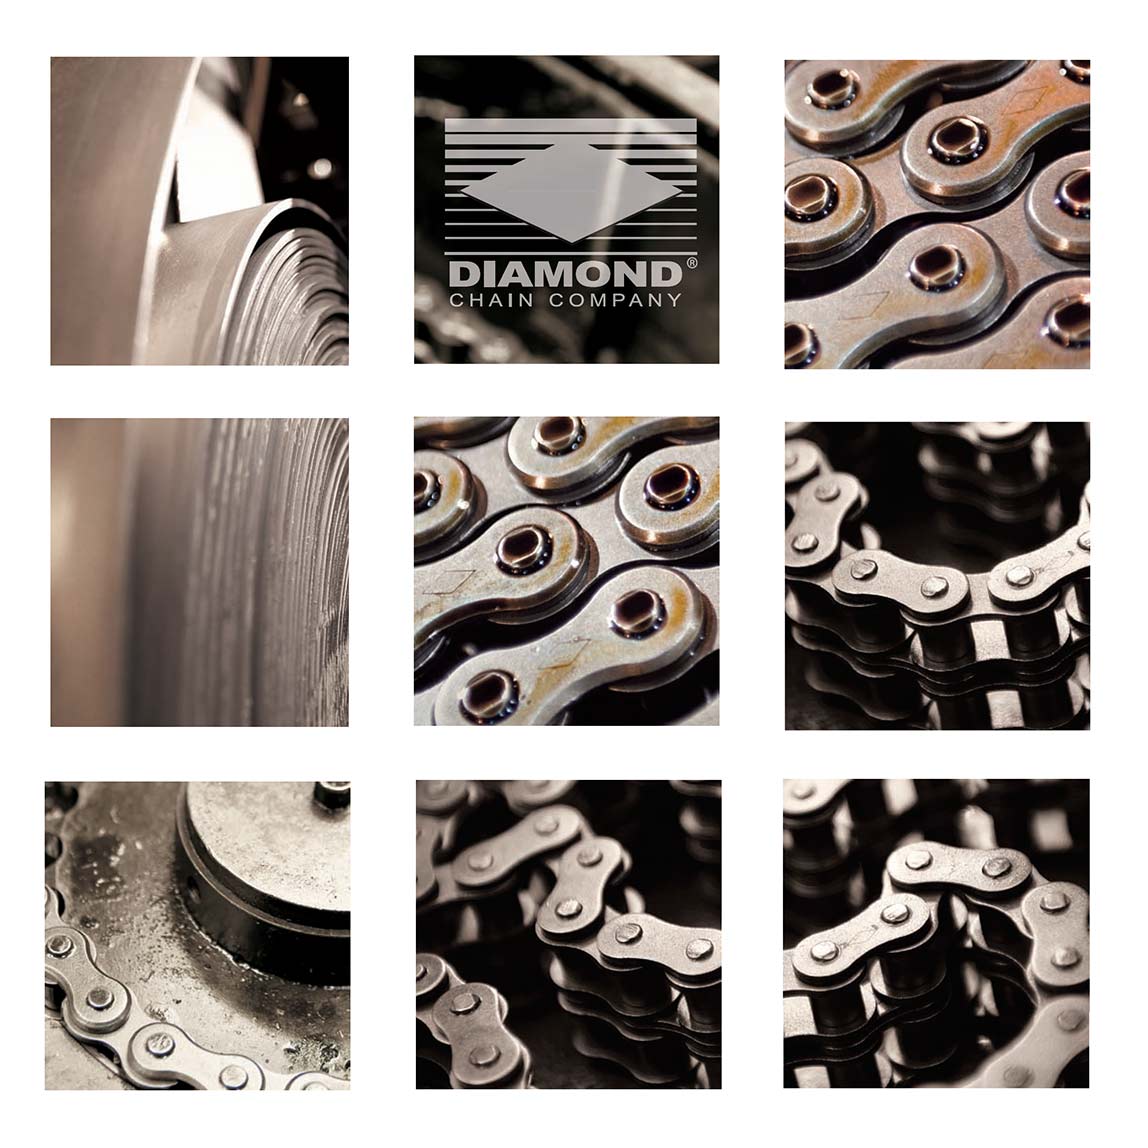 Diamond industrial chains, Sapphire industrial chains, roller chains, coil tubing injector chains from Peel Bearings Tools & Filters in Rockingham, Mandurah, Pinjarra & Peel, WA